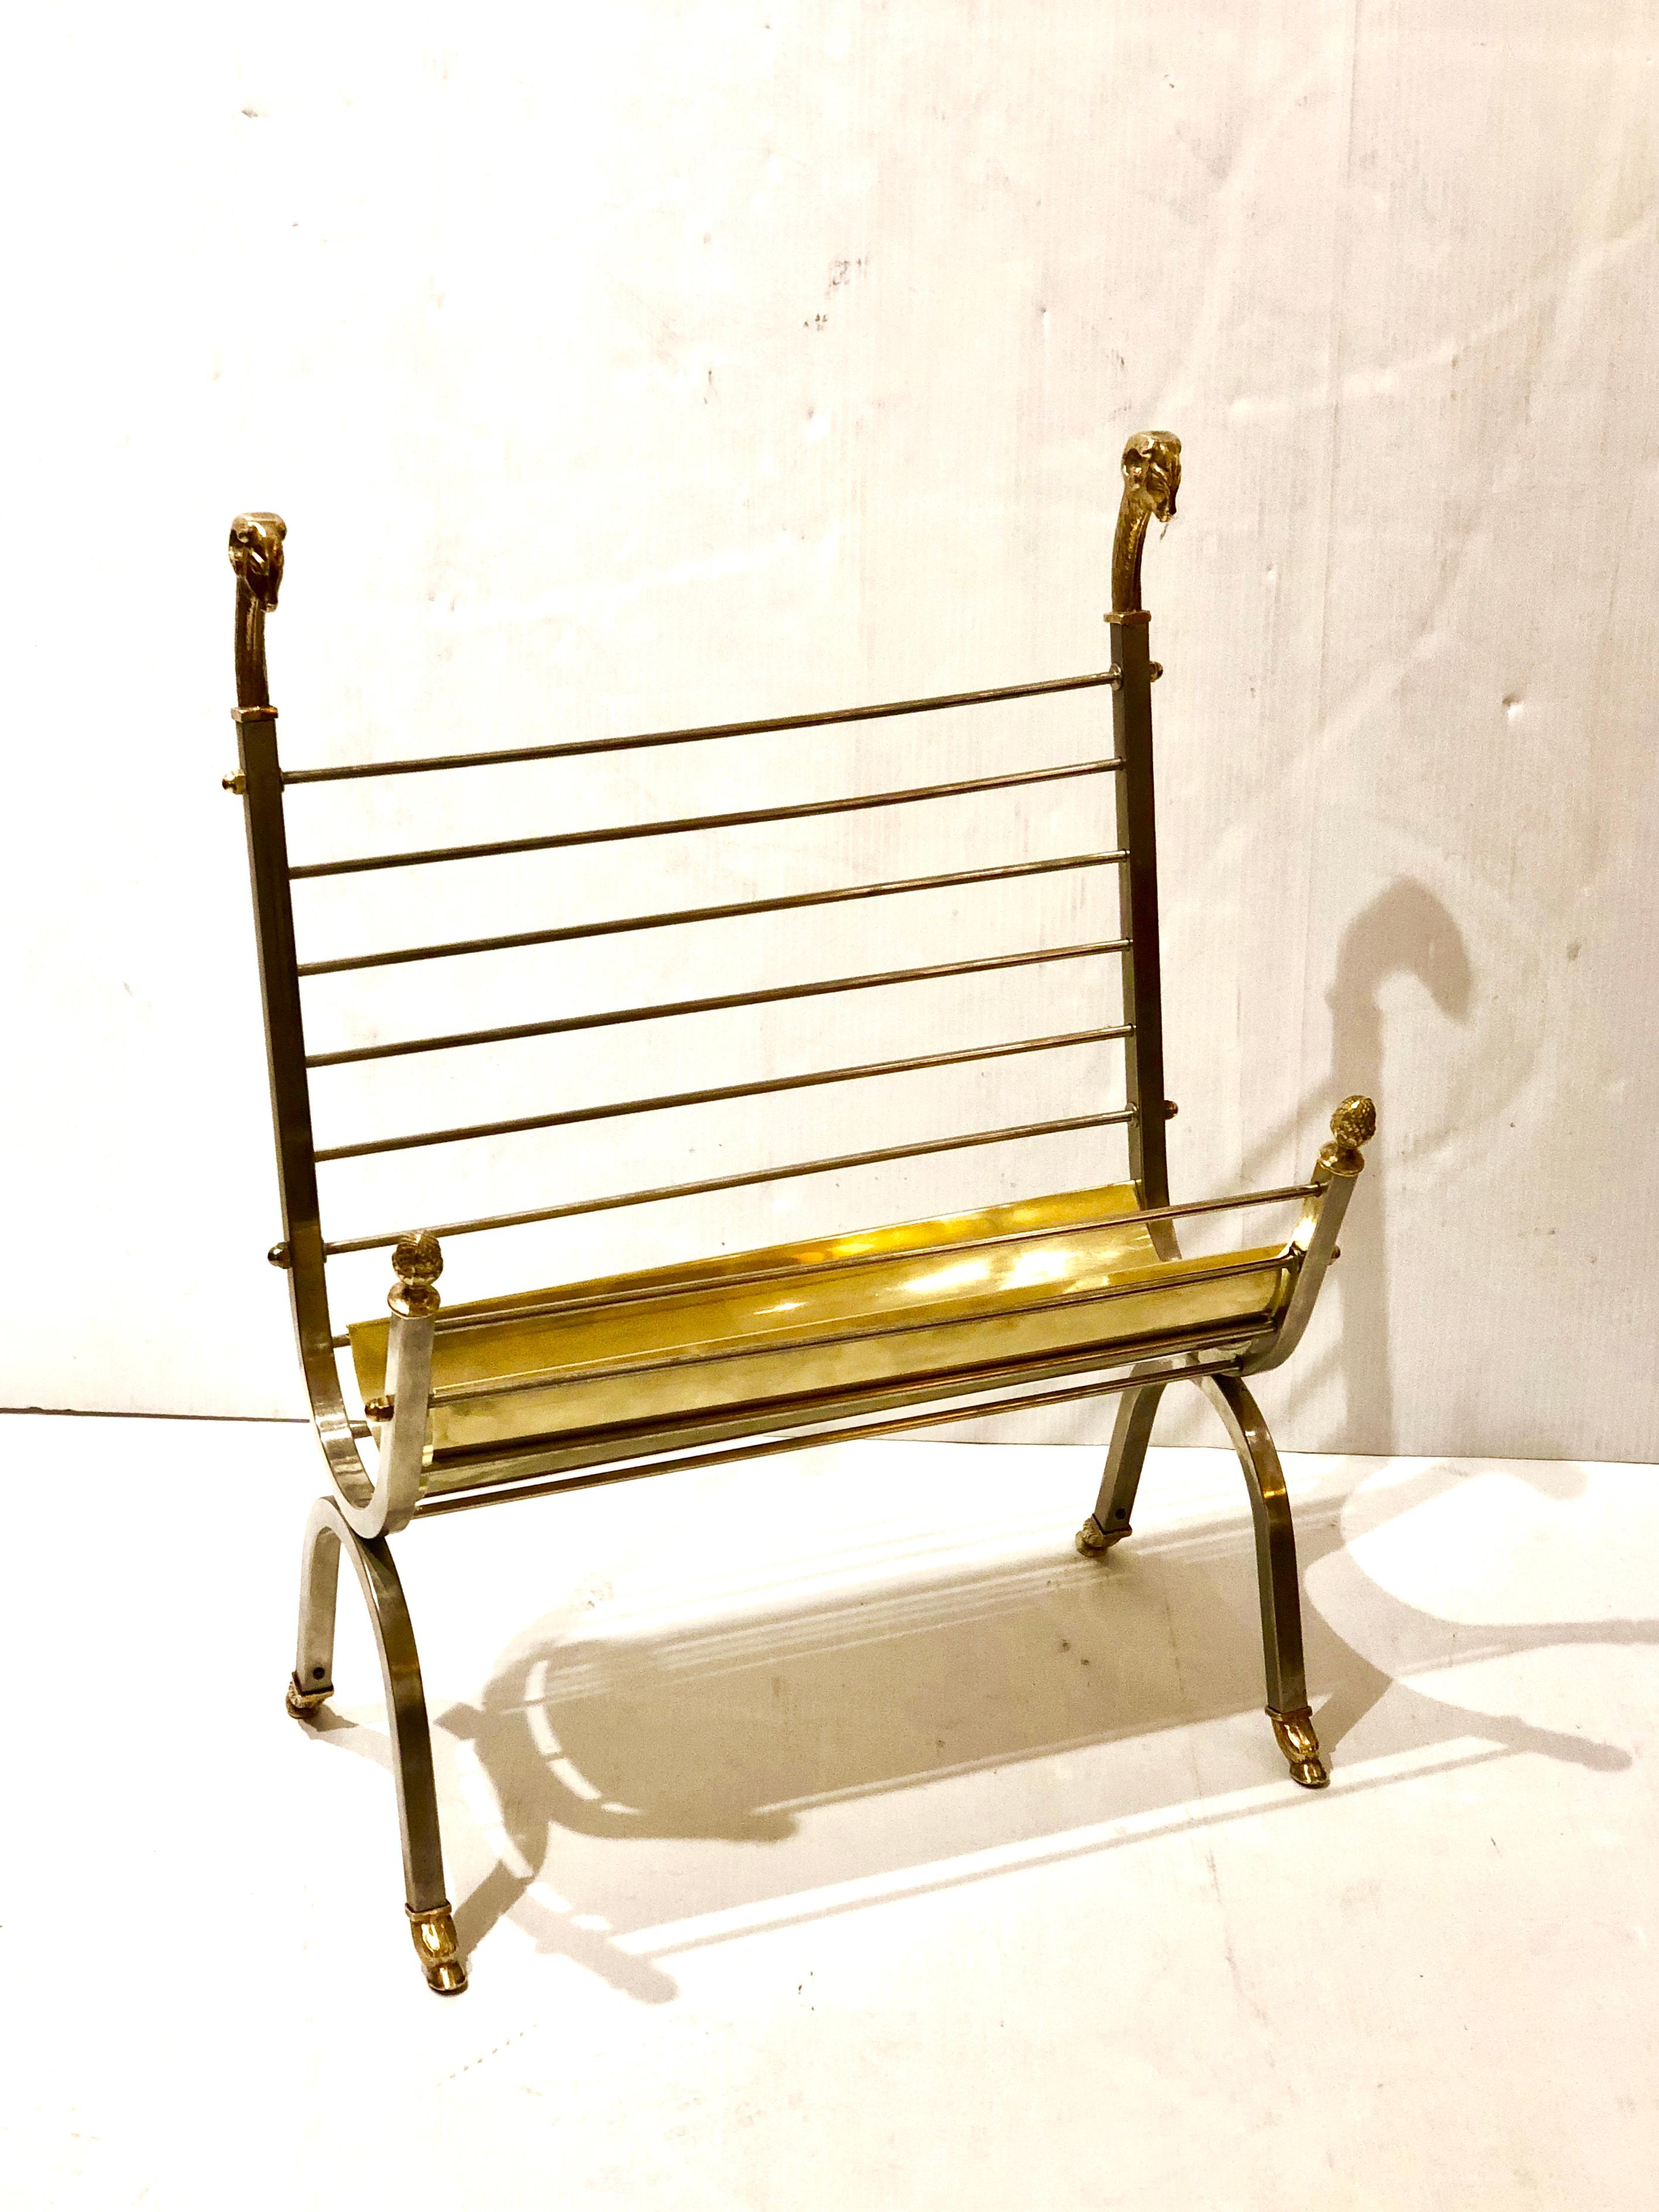 Tall magazine rack in brass and stainless, freshly polished with brass rams heads accents.